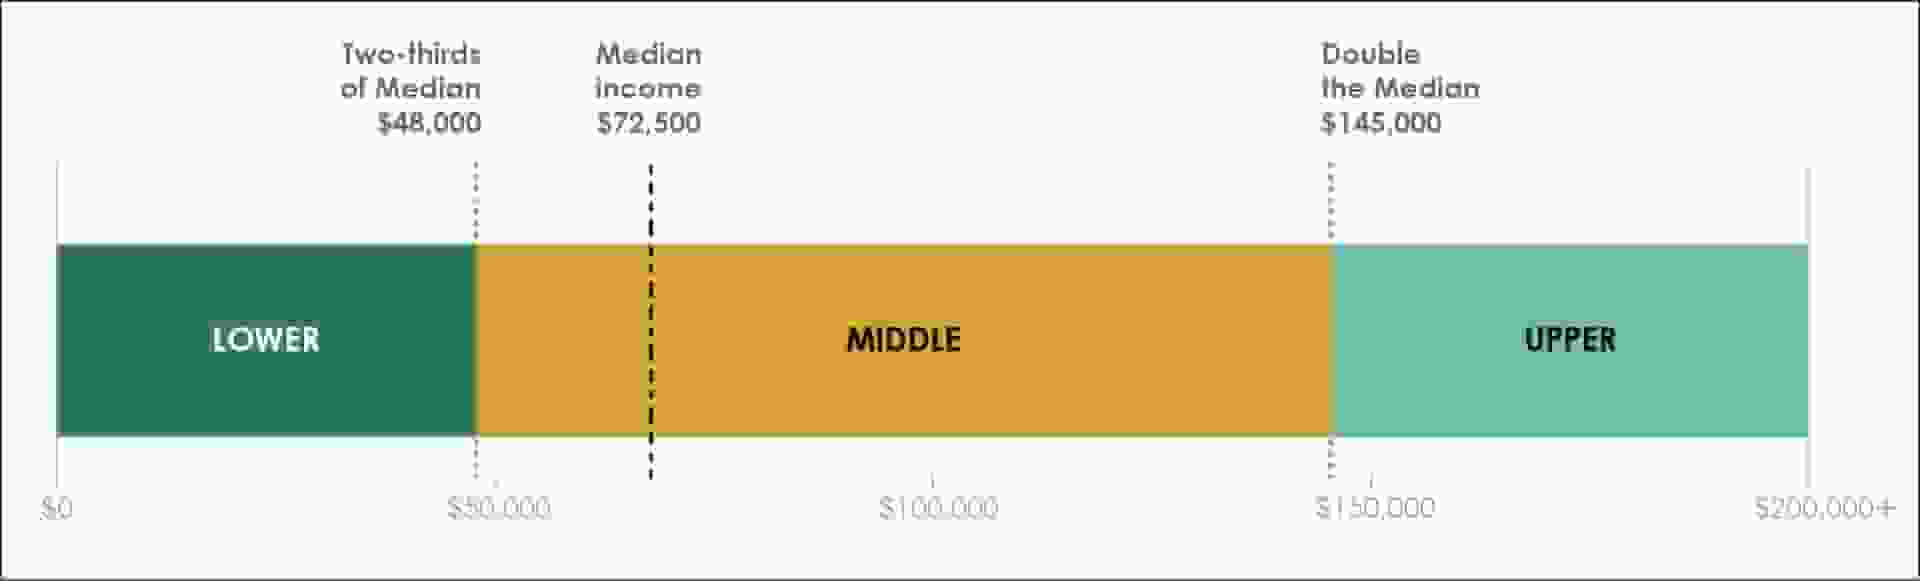 Lower, Middle, and Upper Class Incomes